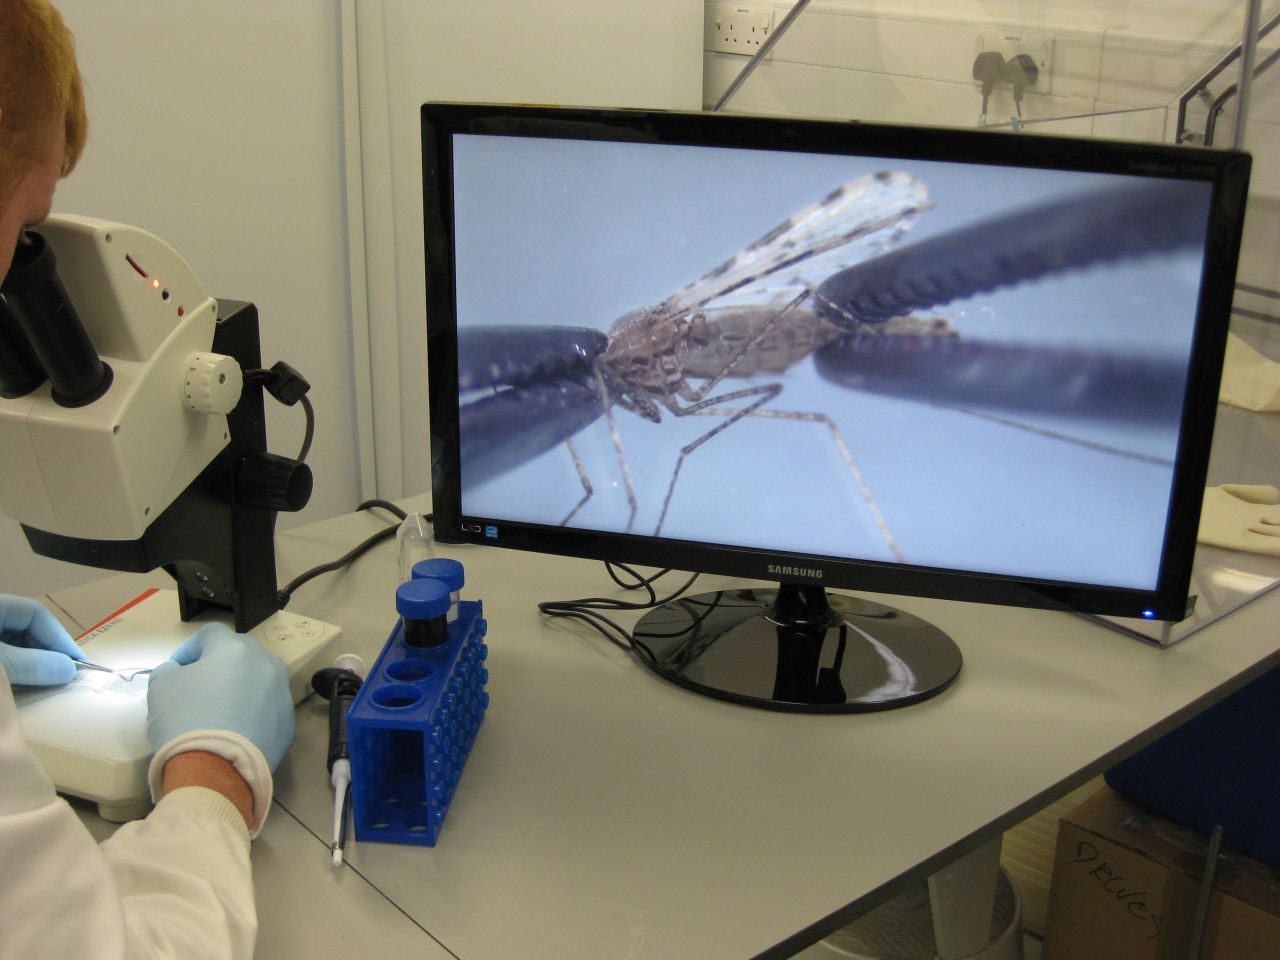 Hill's team at the Jenner Institute have been studying the parasite and the mosquito vectors that carry them for many years. Here, a team member is dissecting a mosquito under a microscope.